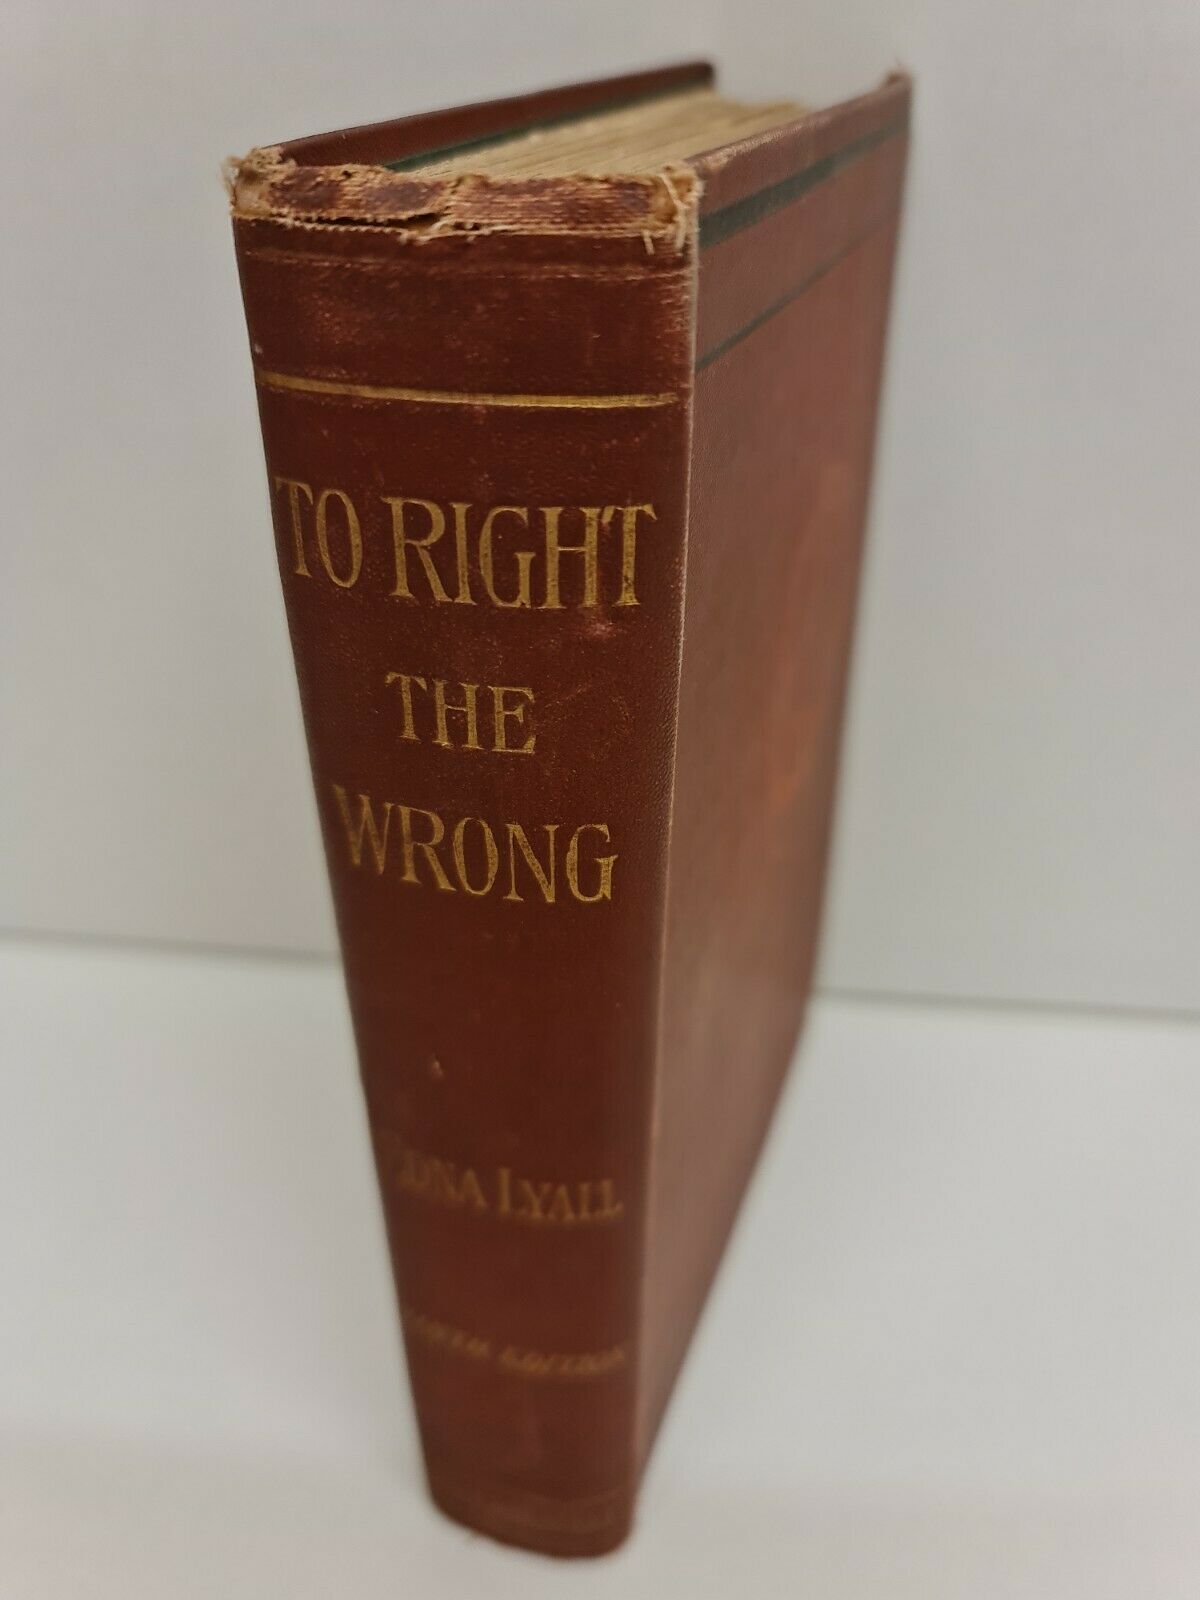 To Right The Wrong by Edna Lyall (1897)